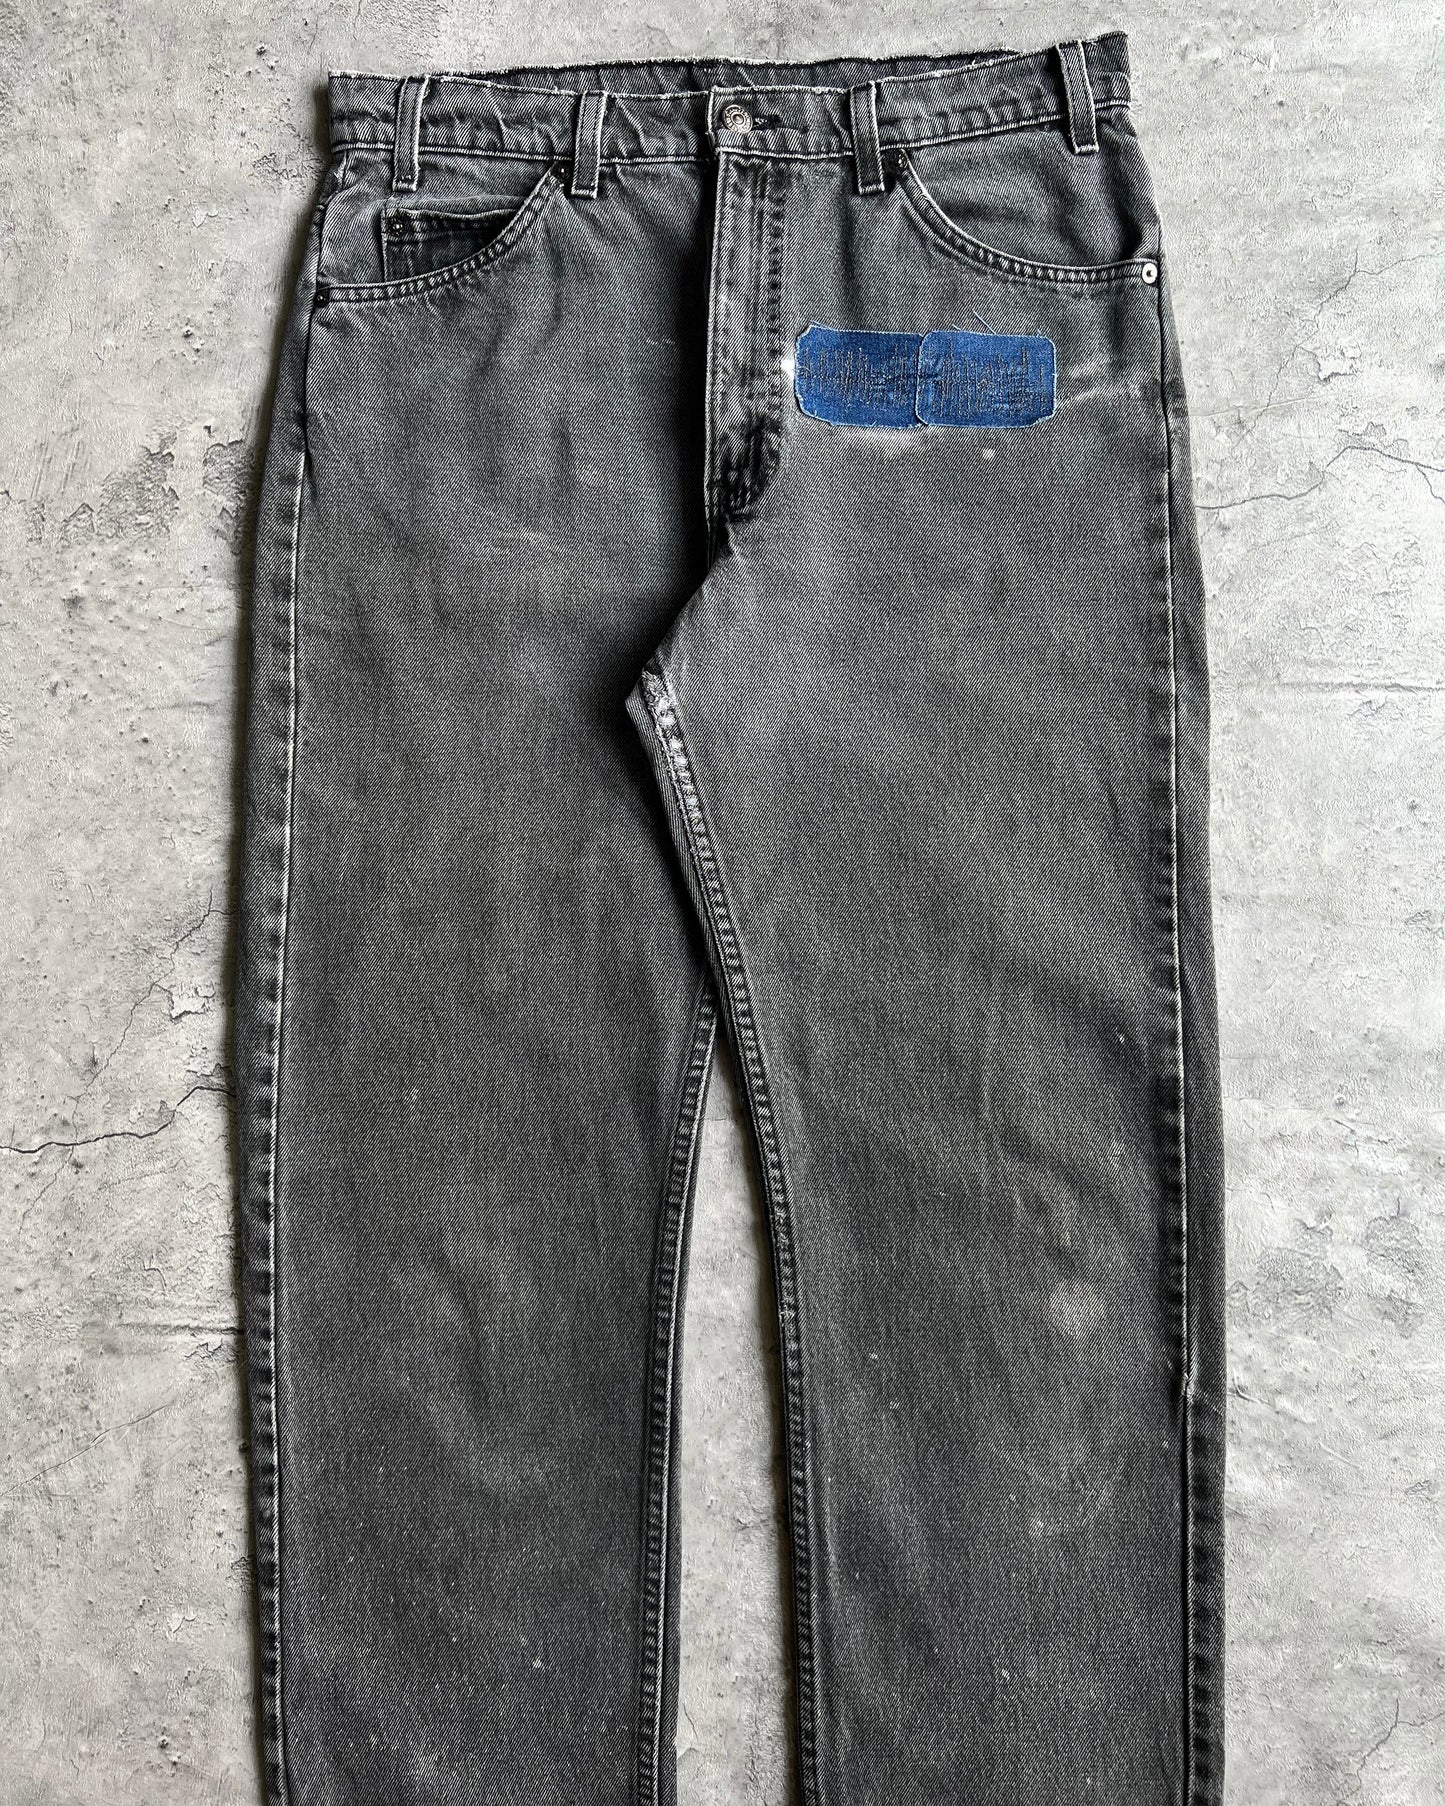 1990S FADED BLACK LEVI'S 505 REPAIRED JEANS (34X34)